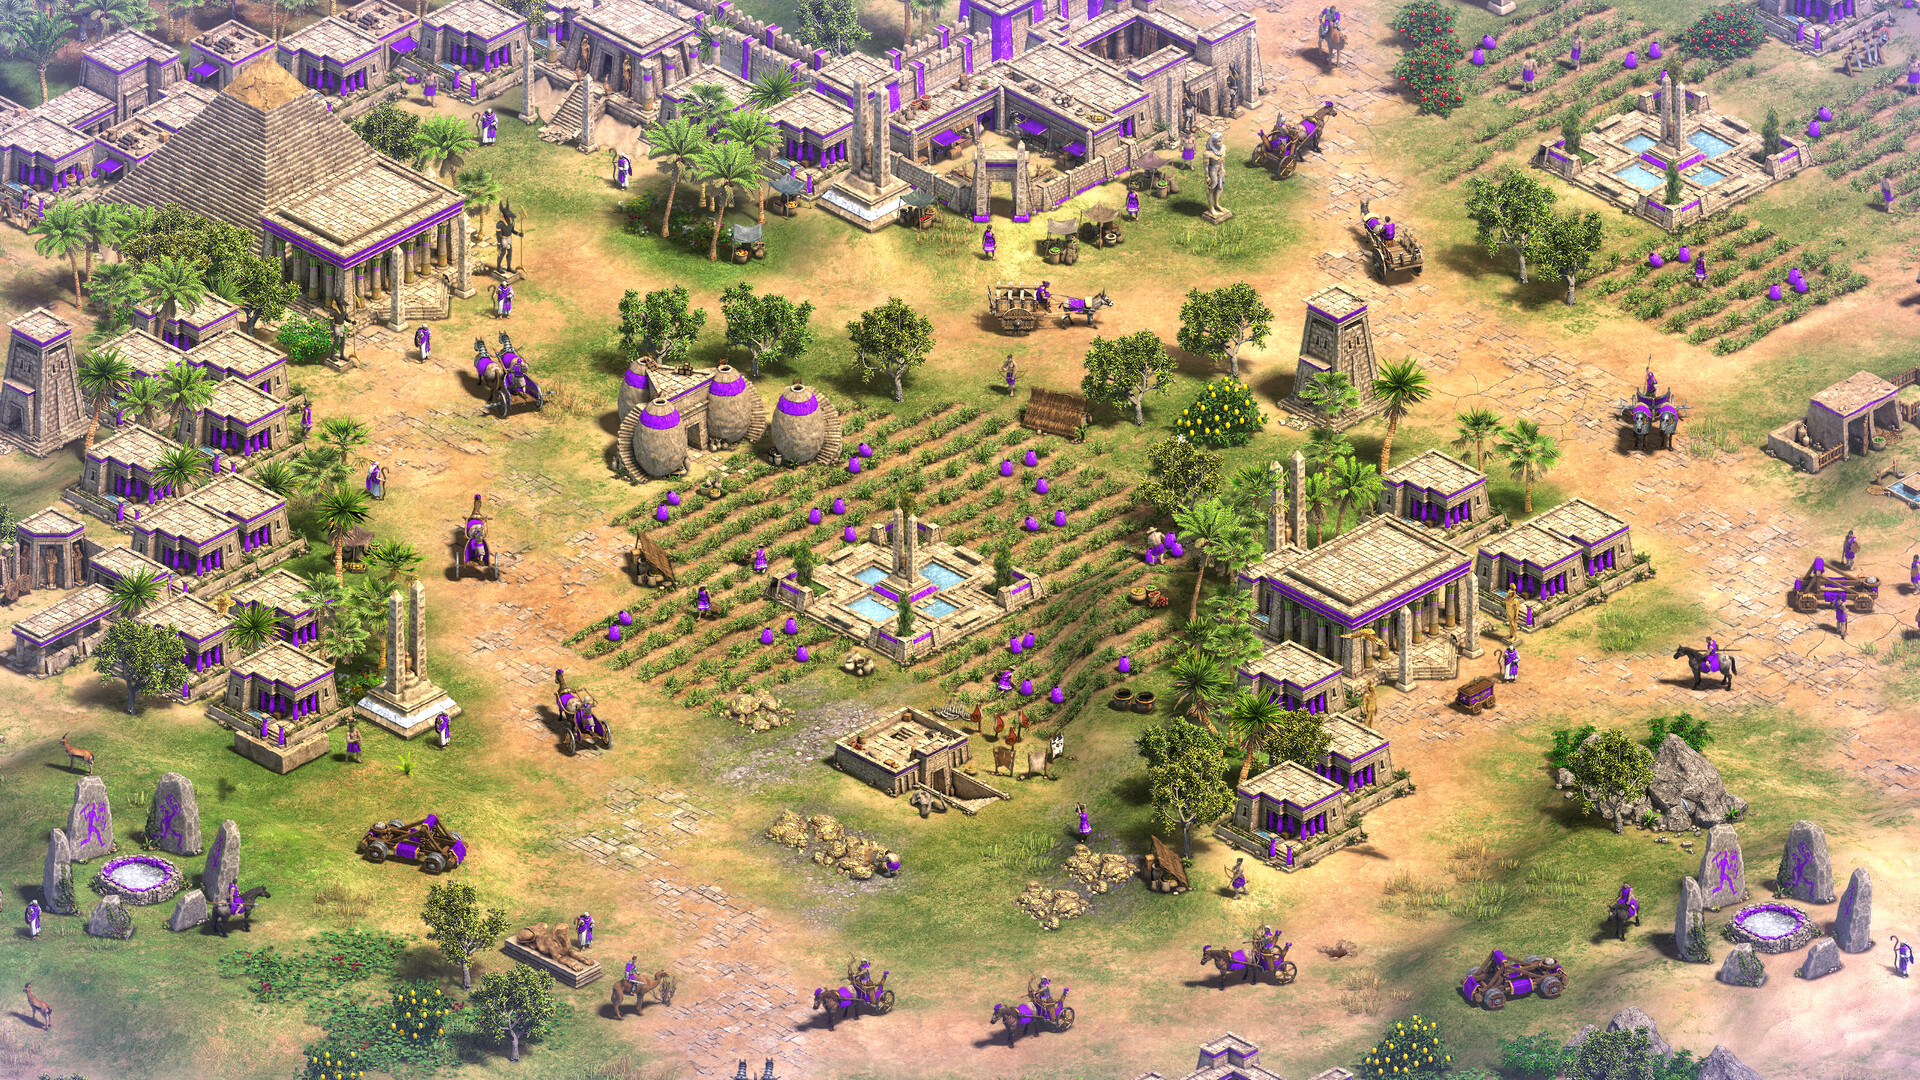 Age of Empires II: Definitive Edition - Return of Rome Featured Screenshot #1